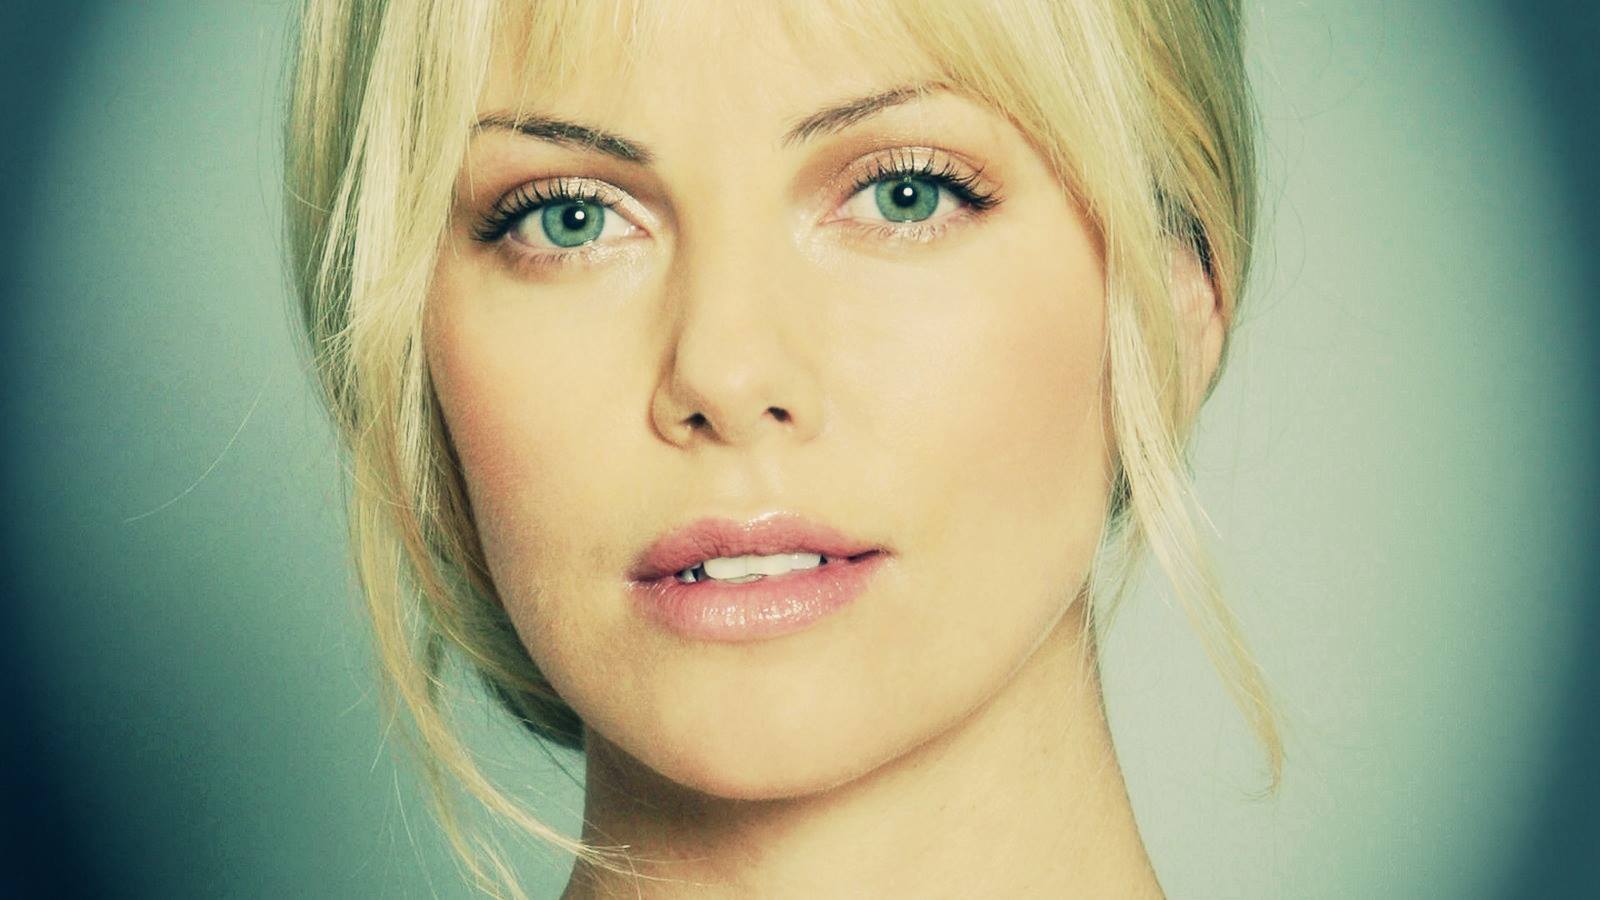 Charlize Theron Picture